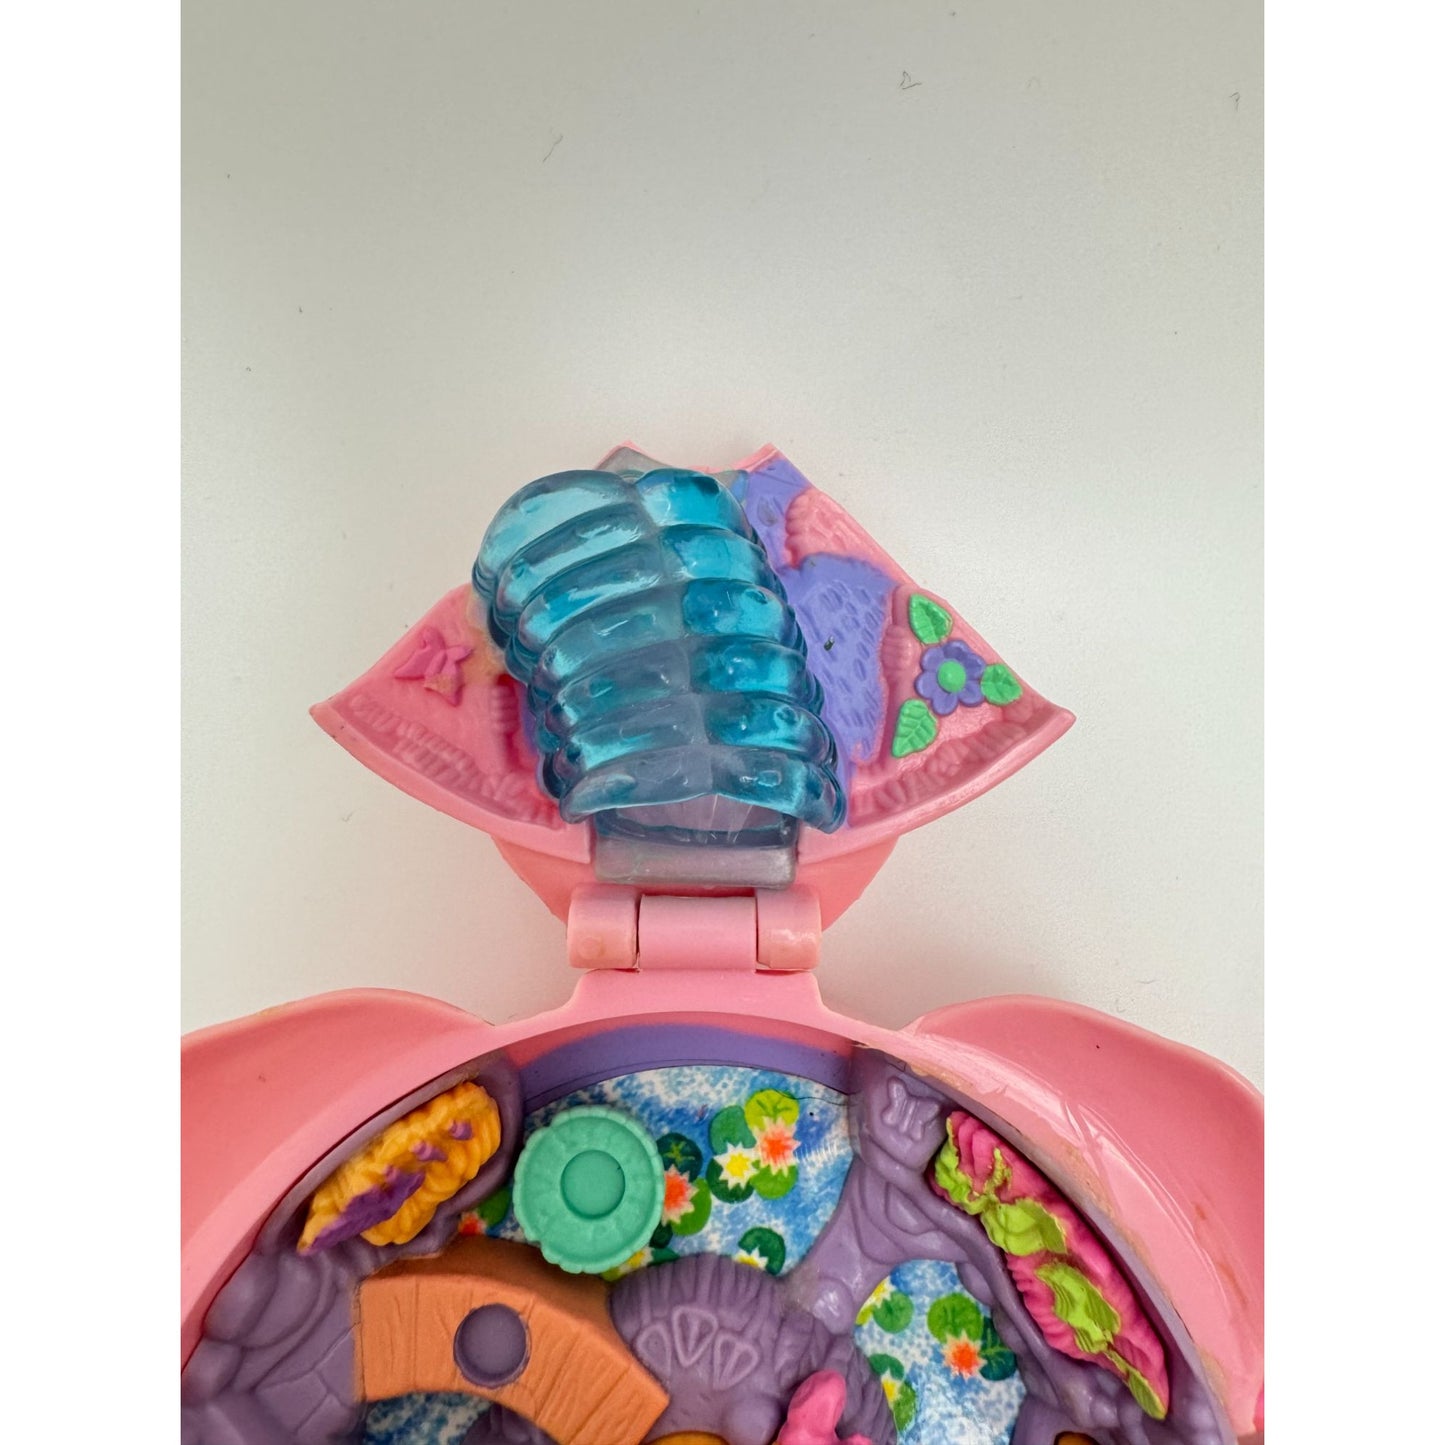 1996 Polly Pocket Fountain Fantasy Compact ONLY